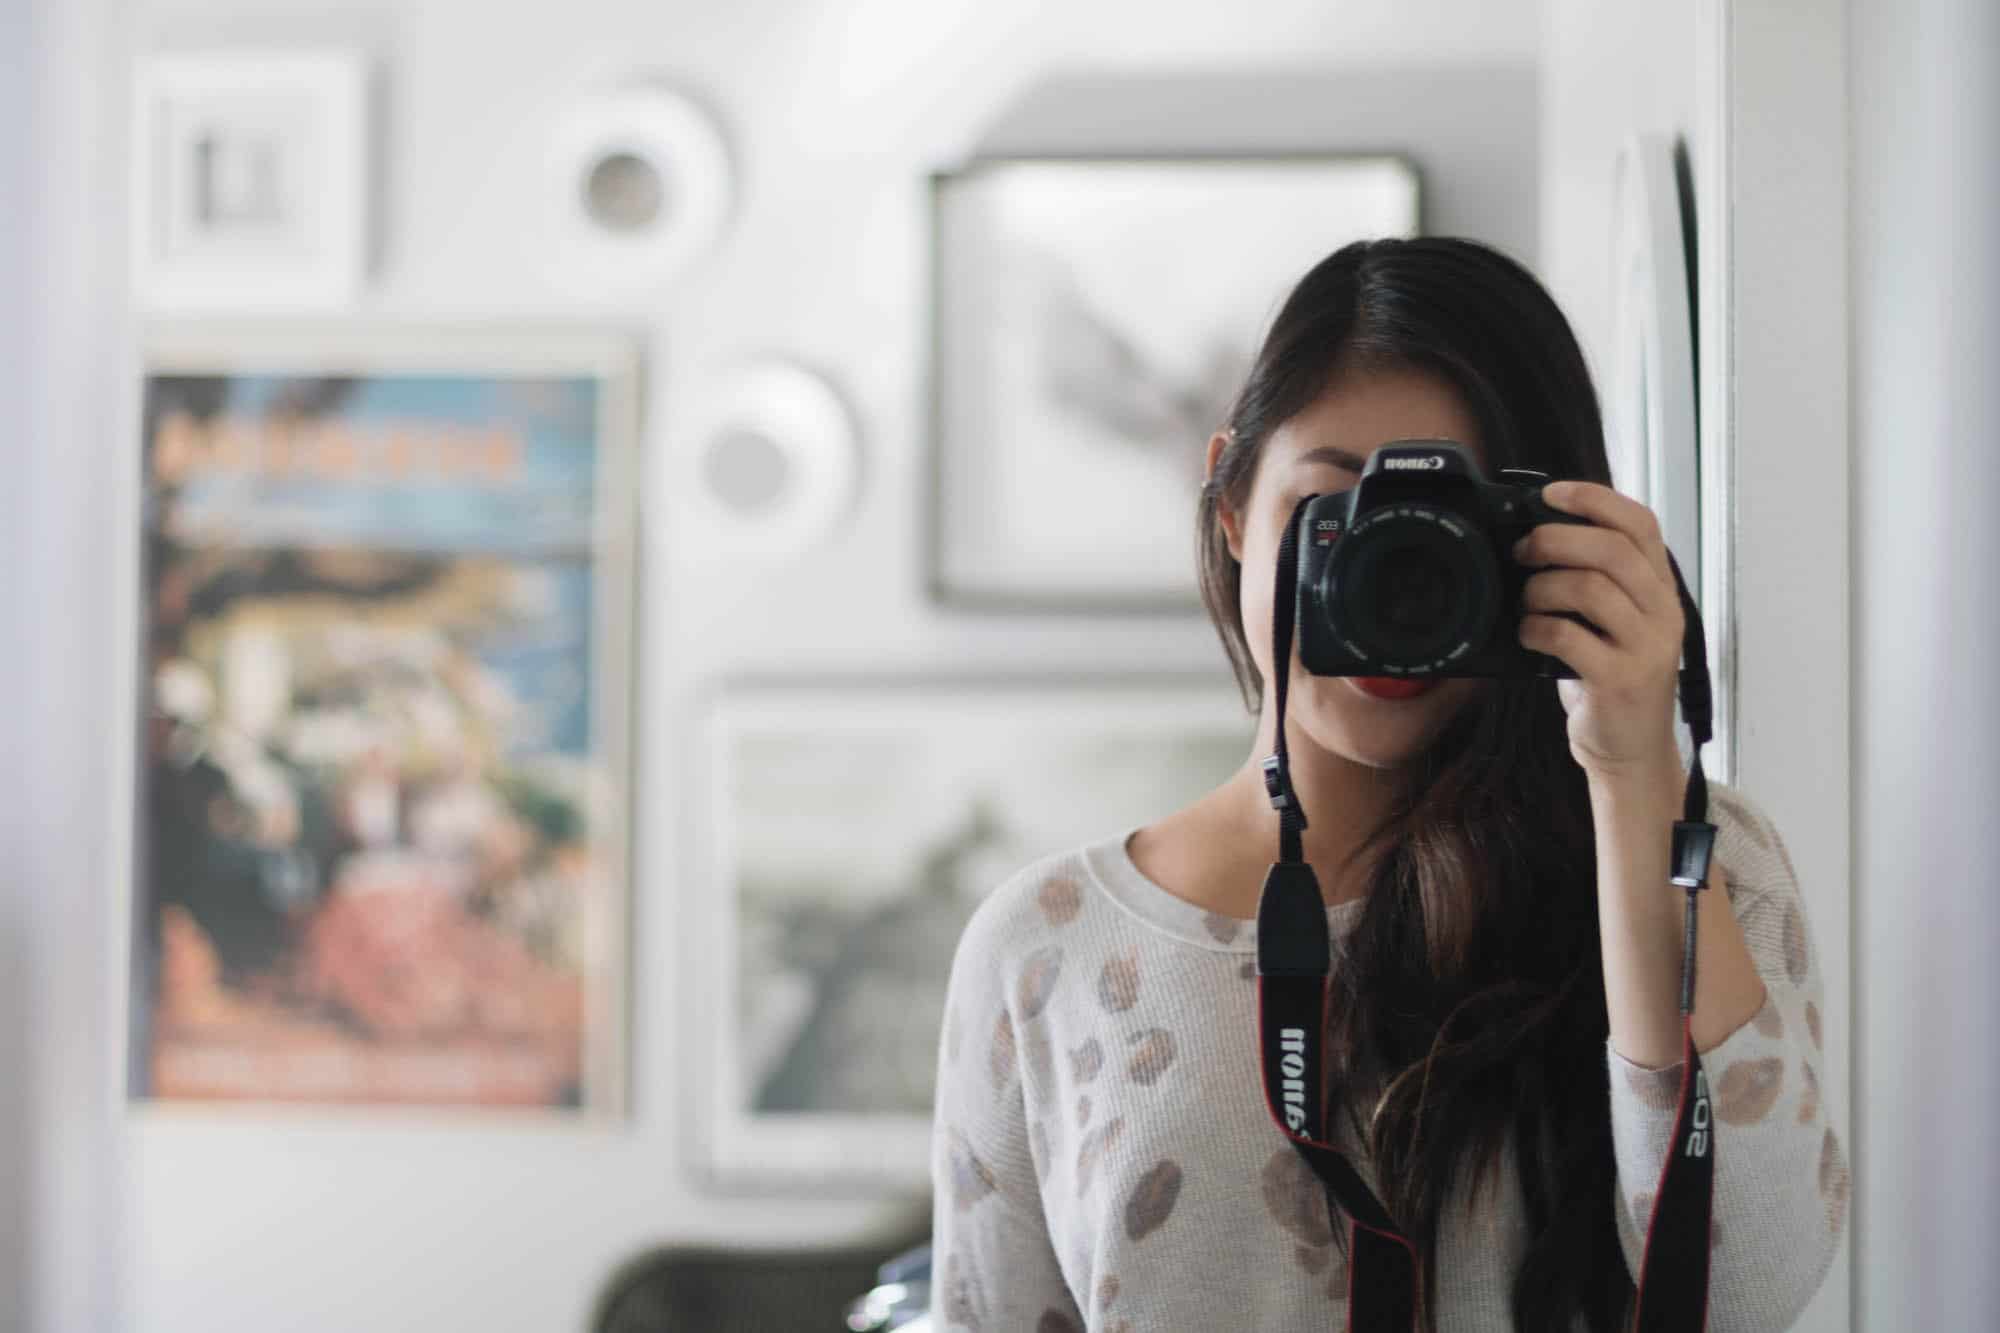 The author, Jessica Lam, taking a photo with her professional camera in the mirror of her bedroom at the Hotel Carlyle. She is in a white top and her face is covered by the camera.